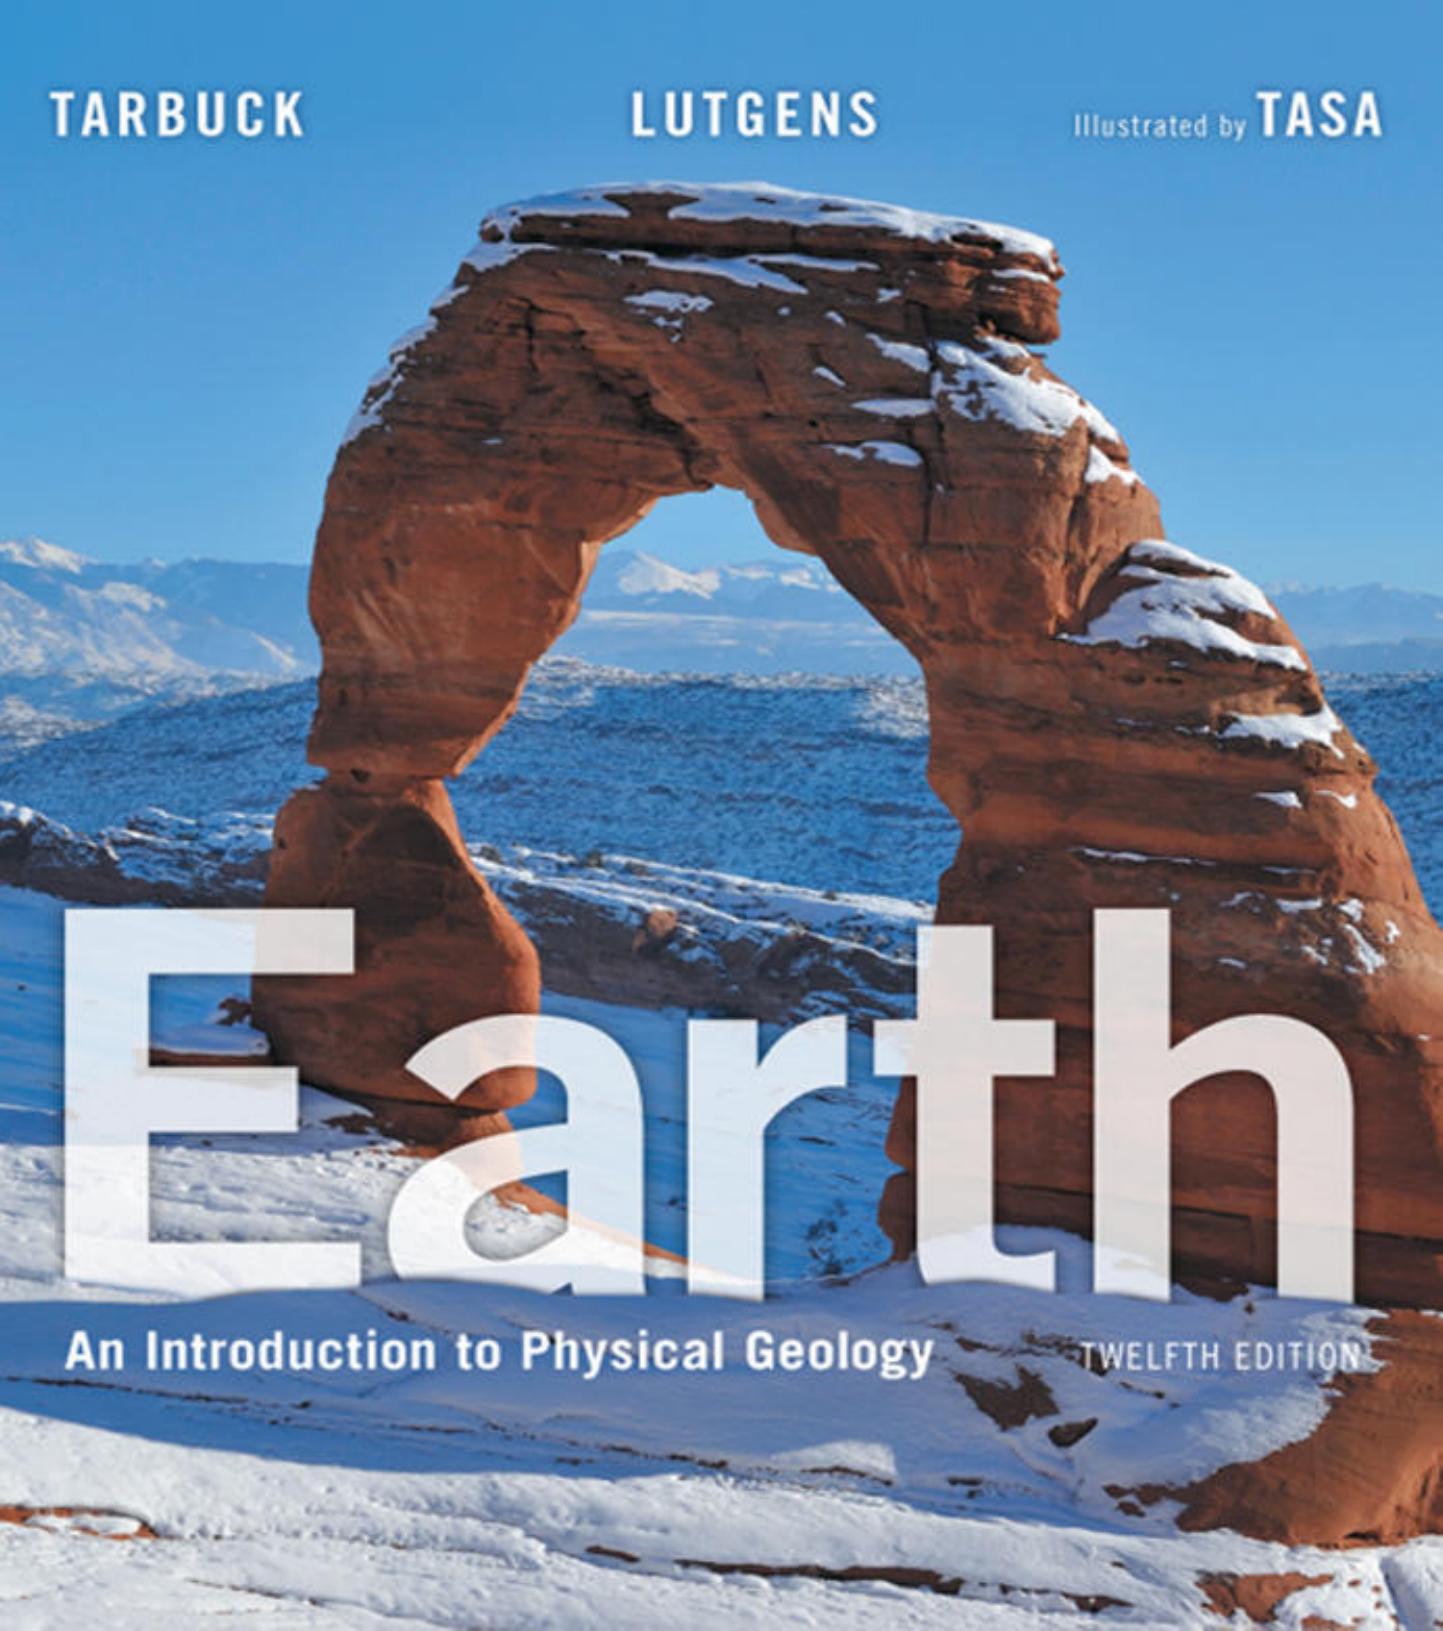 Earth An Introduction to Physical Geology 12th Edition.jpg